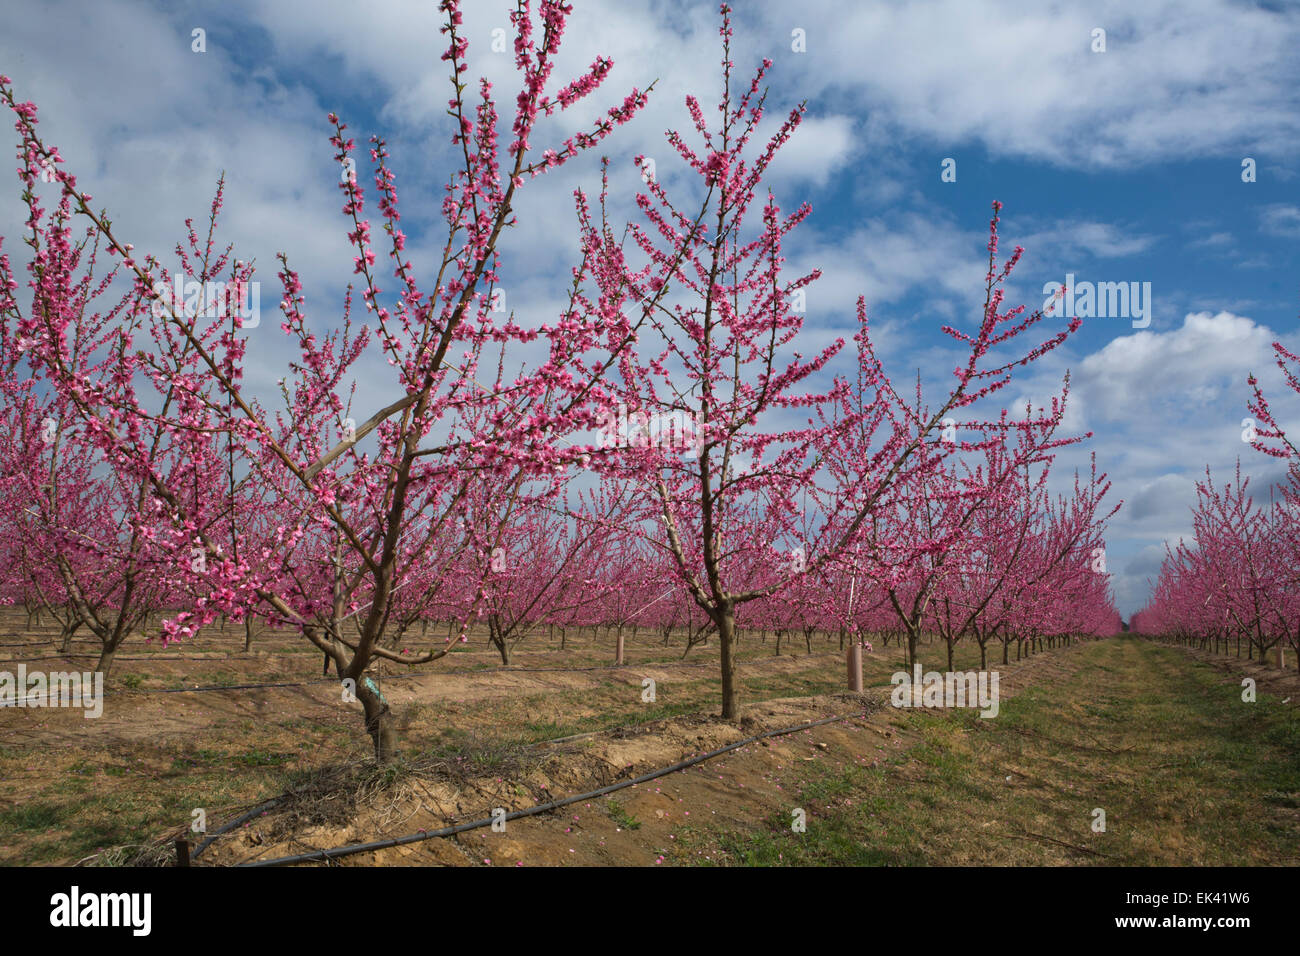 Blossoming tree in field on background of cludy sky, Badajoz, Spain Stock Photo